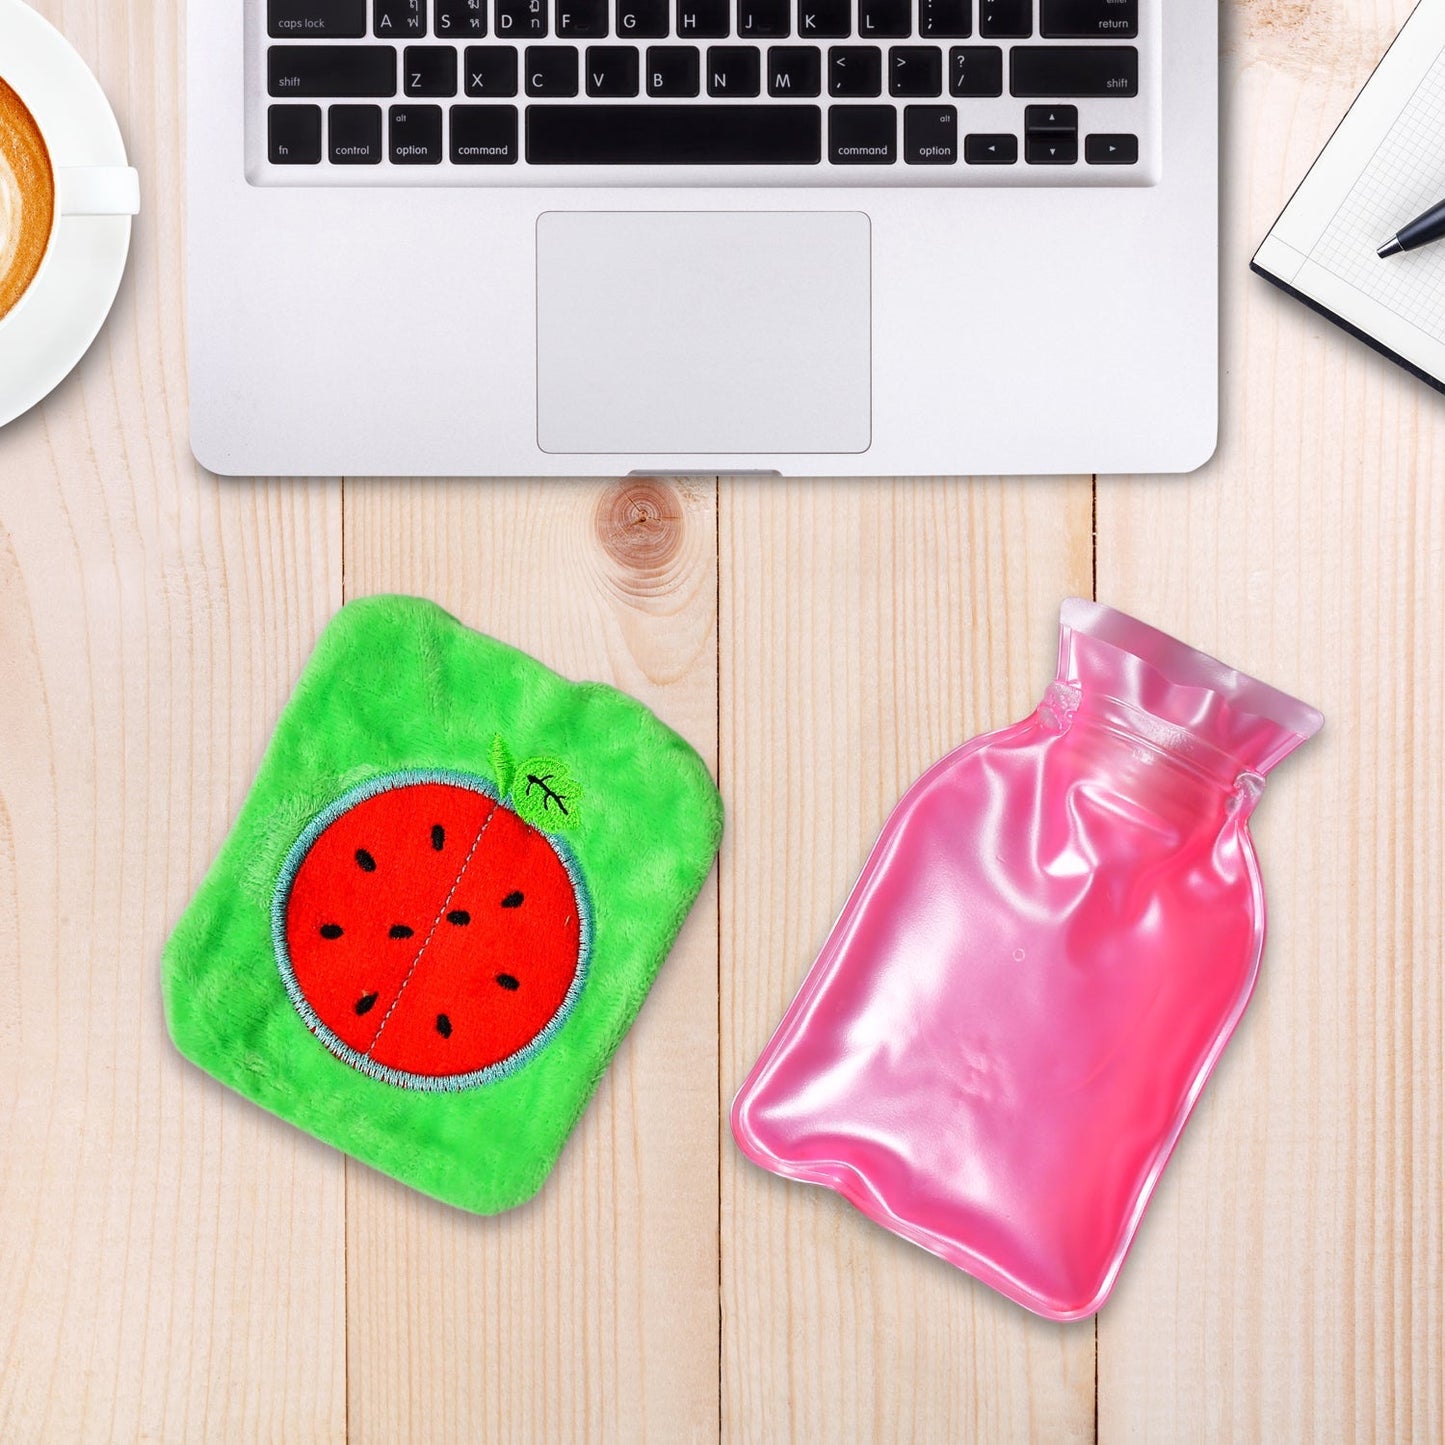 6509 Watermelon small Hot Water Bag with Cover for Pain Relief, Neck, Shoulder Pain and Hand, Feet Warmer, Menstrual Cramps. DeoDap